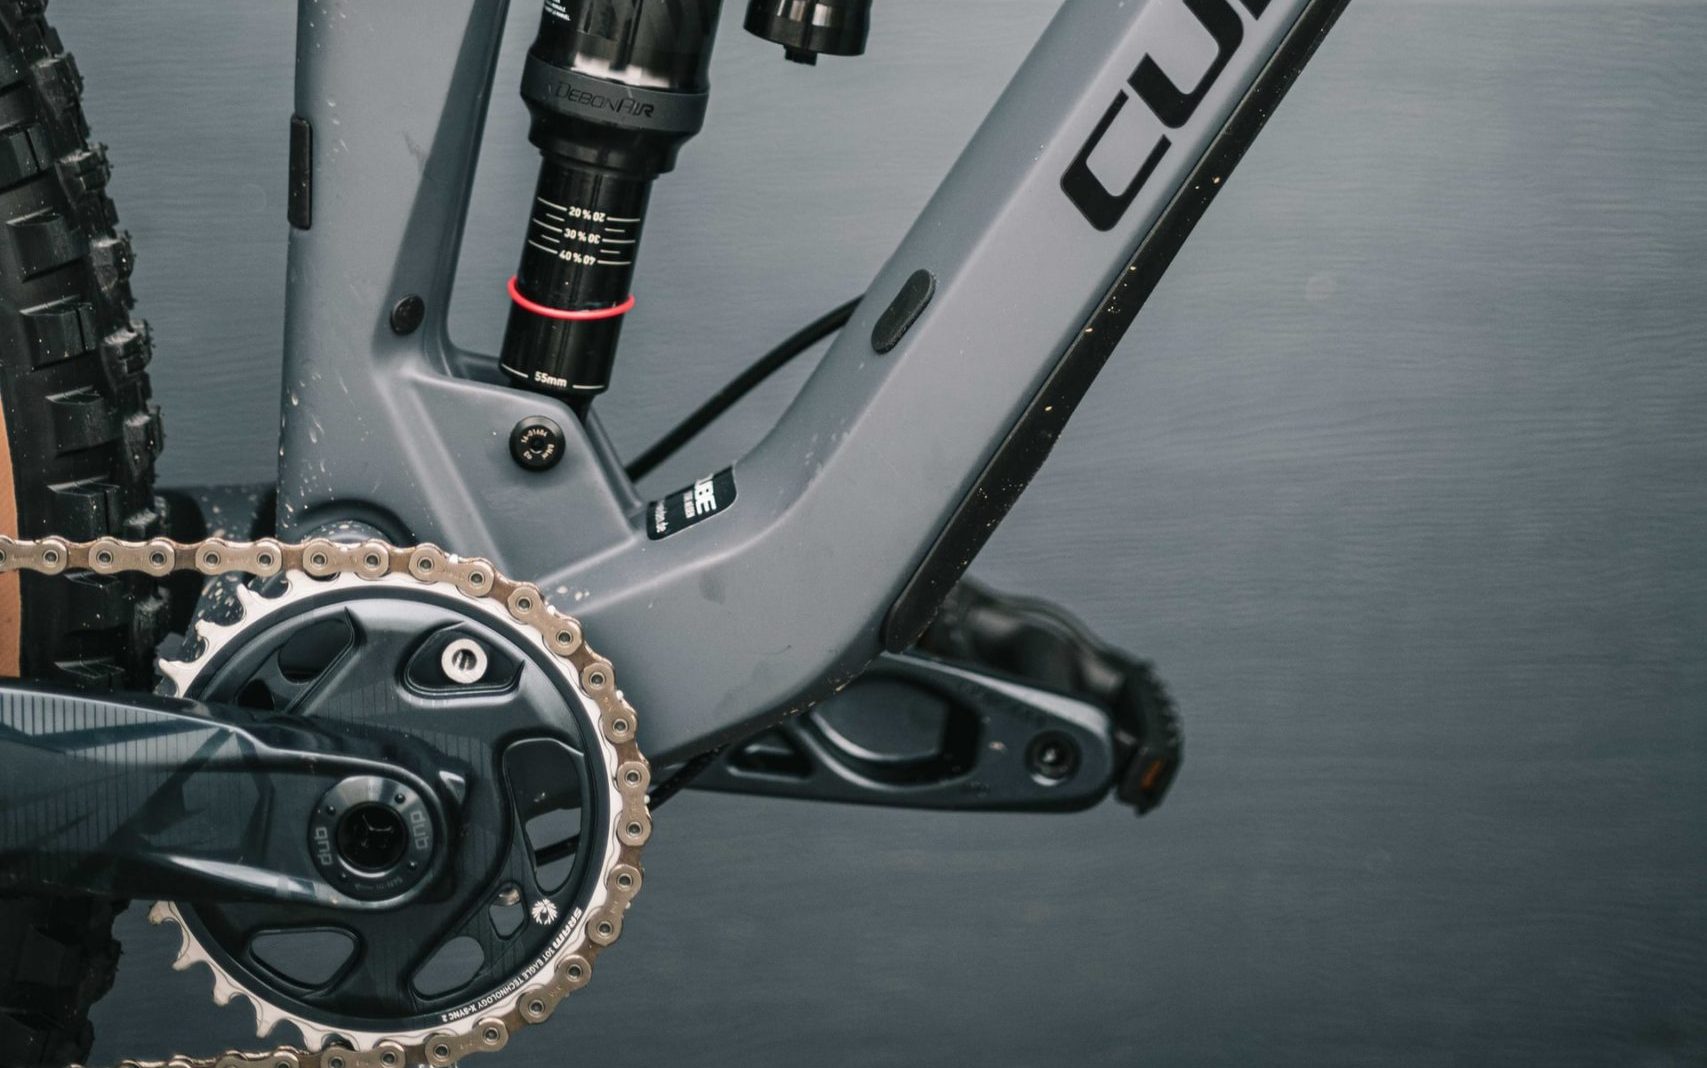 MicroSHIFT VS SRAM: A Cyclist’s Guide To Groupsets